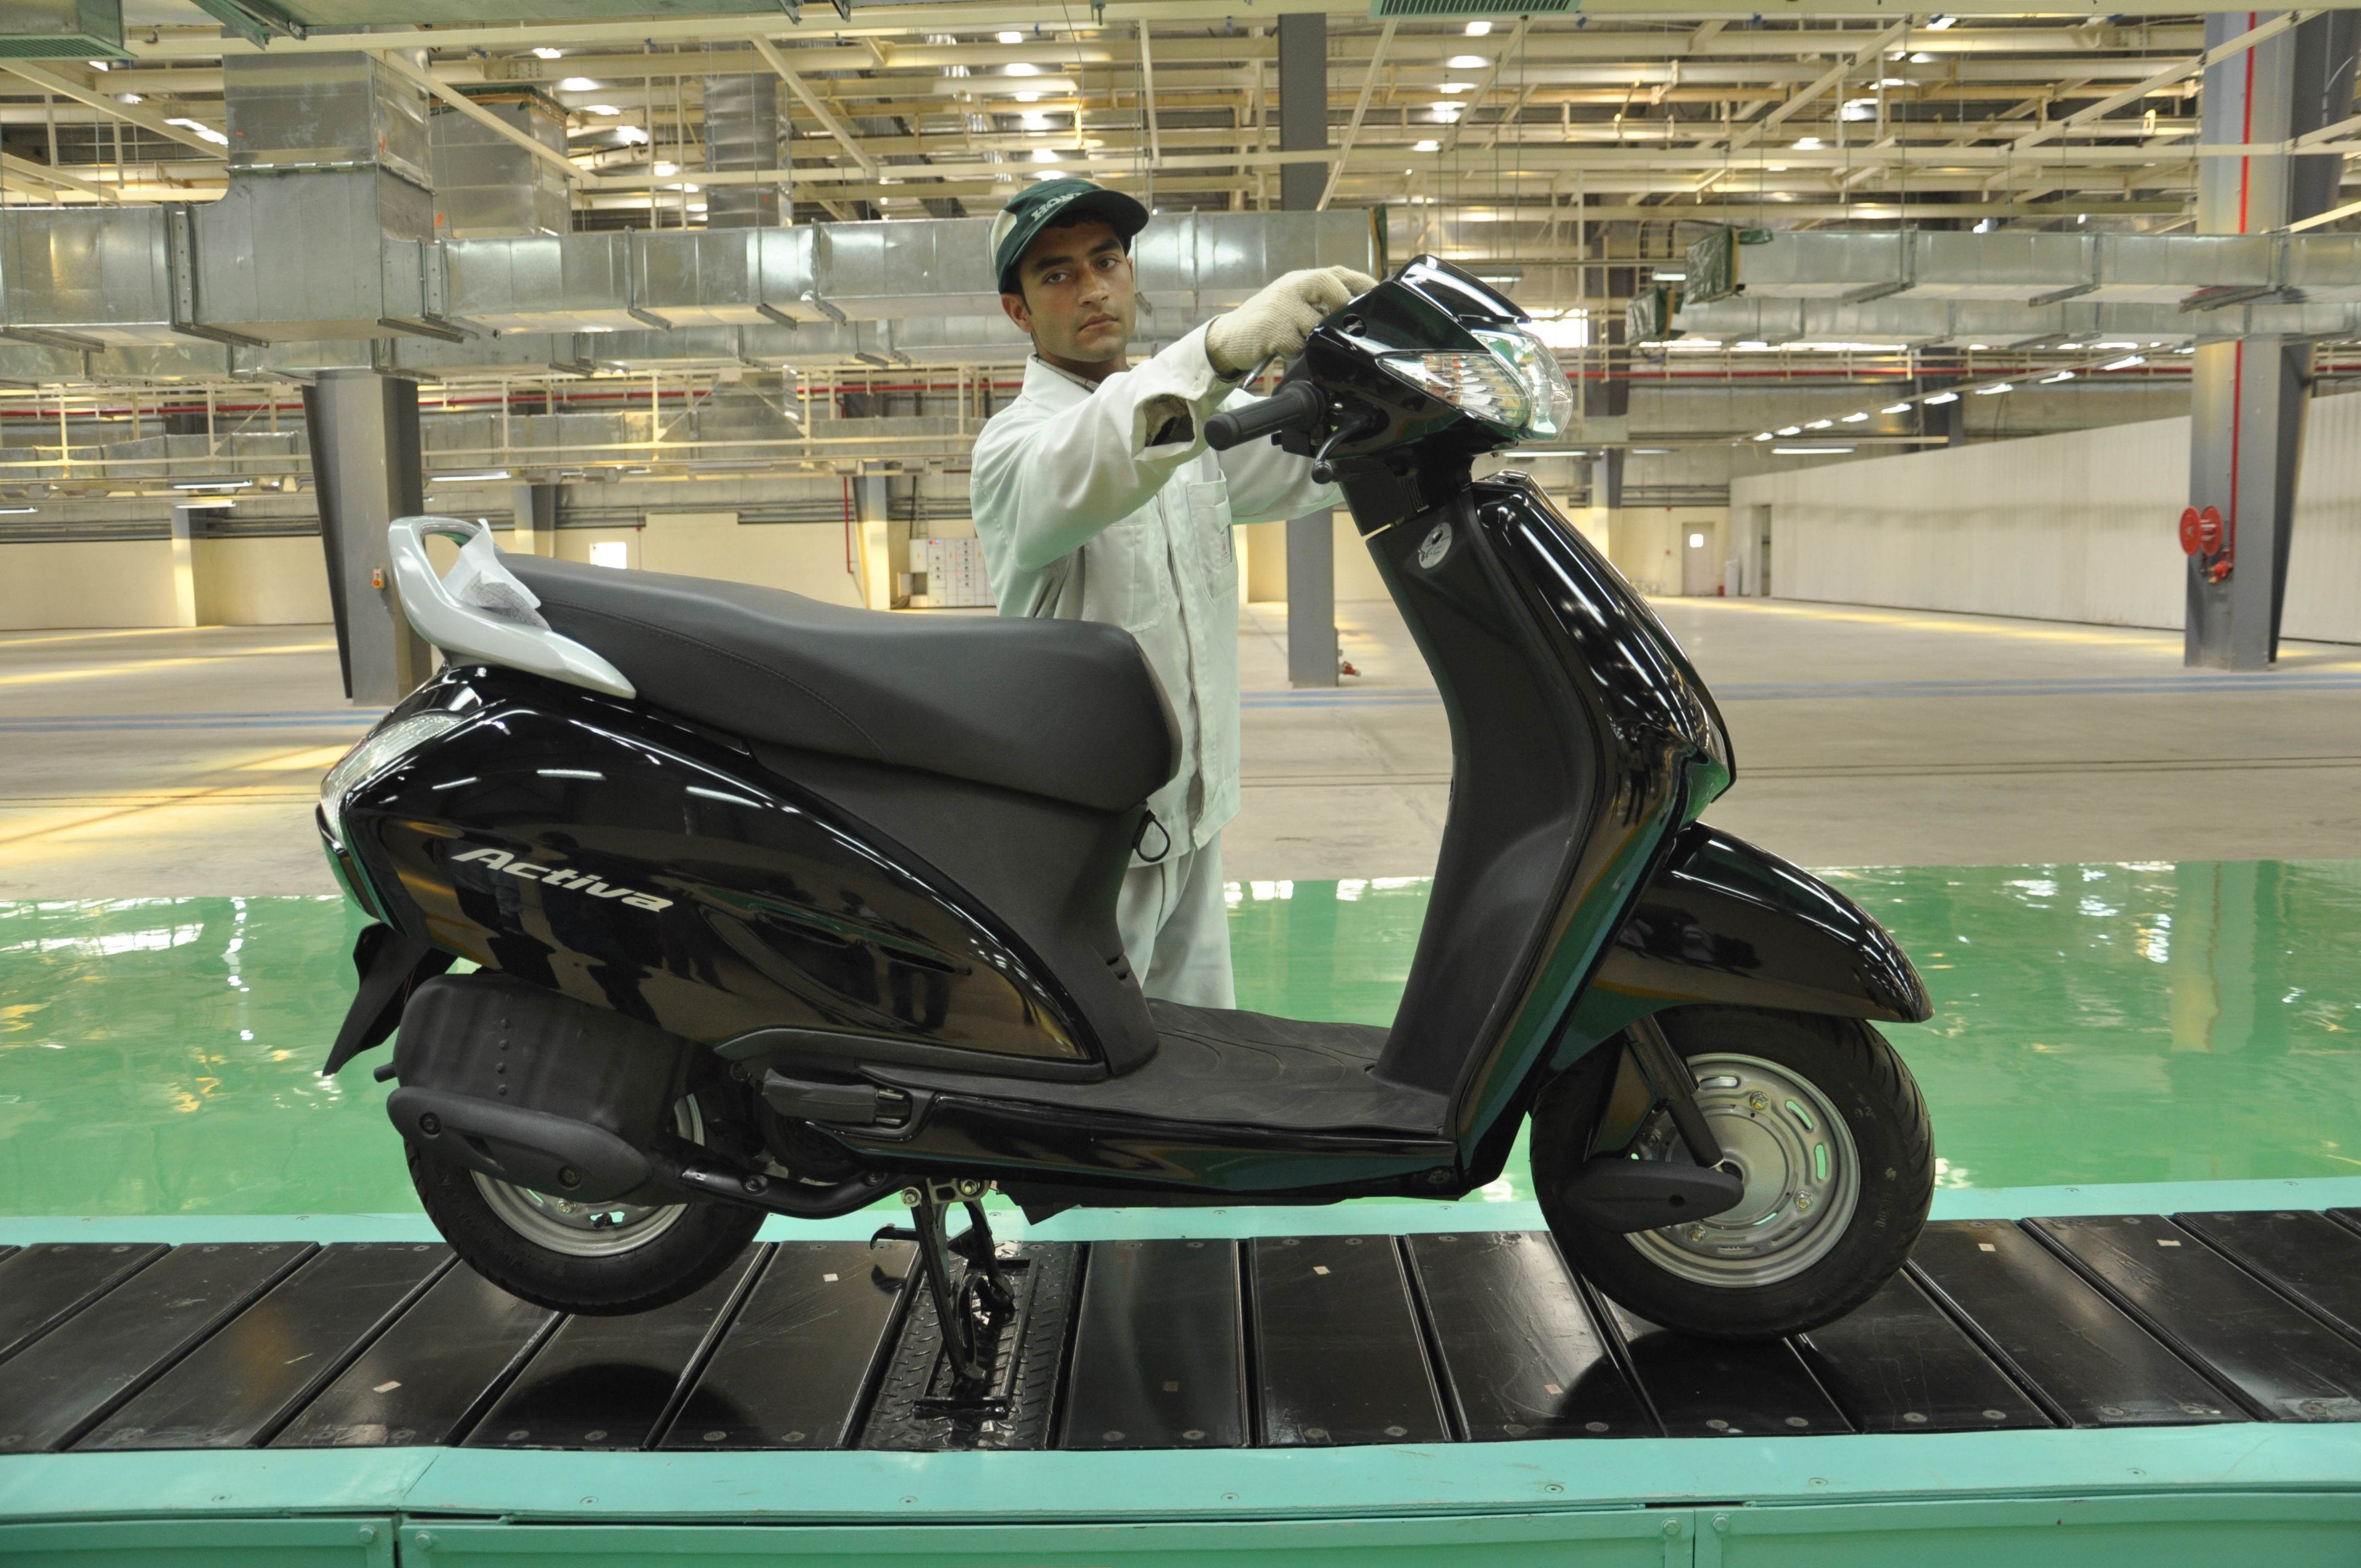 Signs of recovery: Hero MotoCorp sells 4.5 lakh units in June